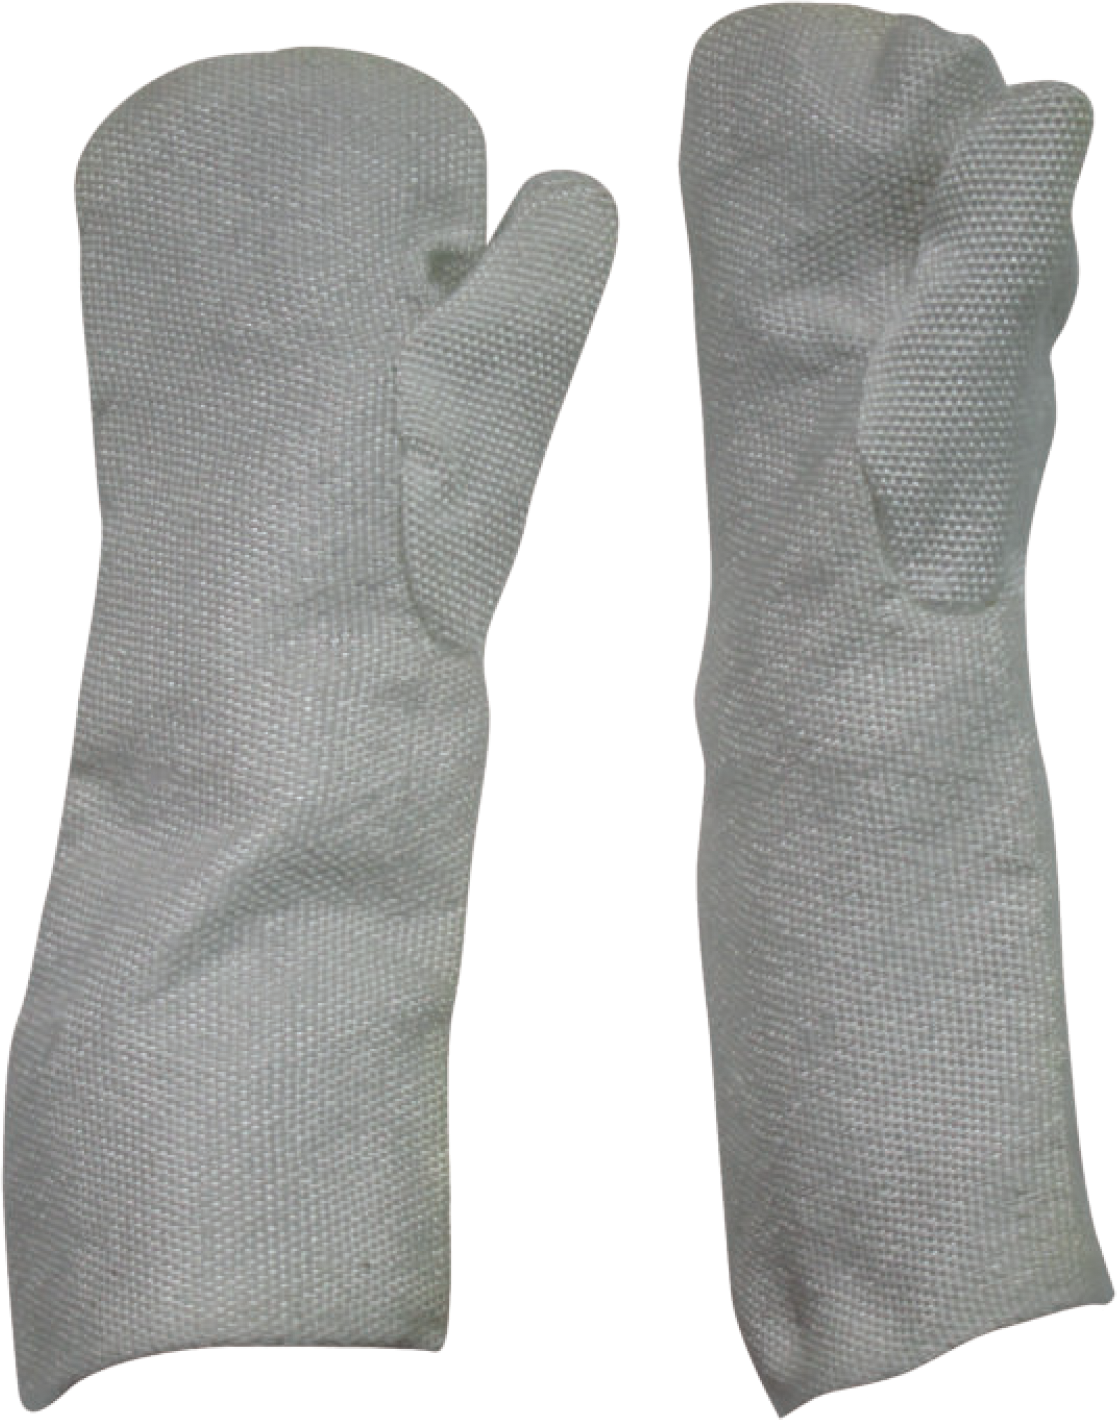 Fibre-Glass Fabric Mitten Gloves- Extreme Temperature Protection Gloves